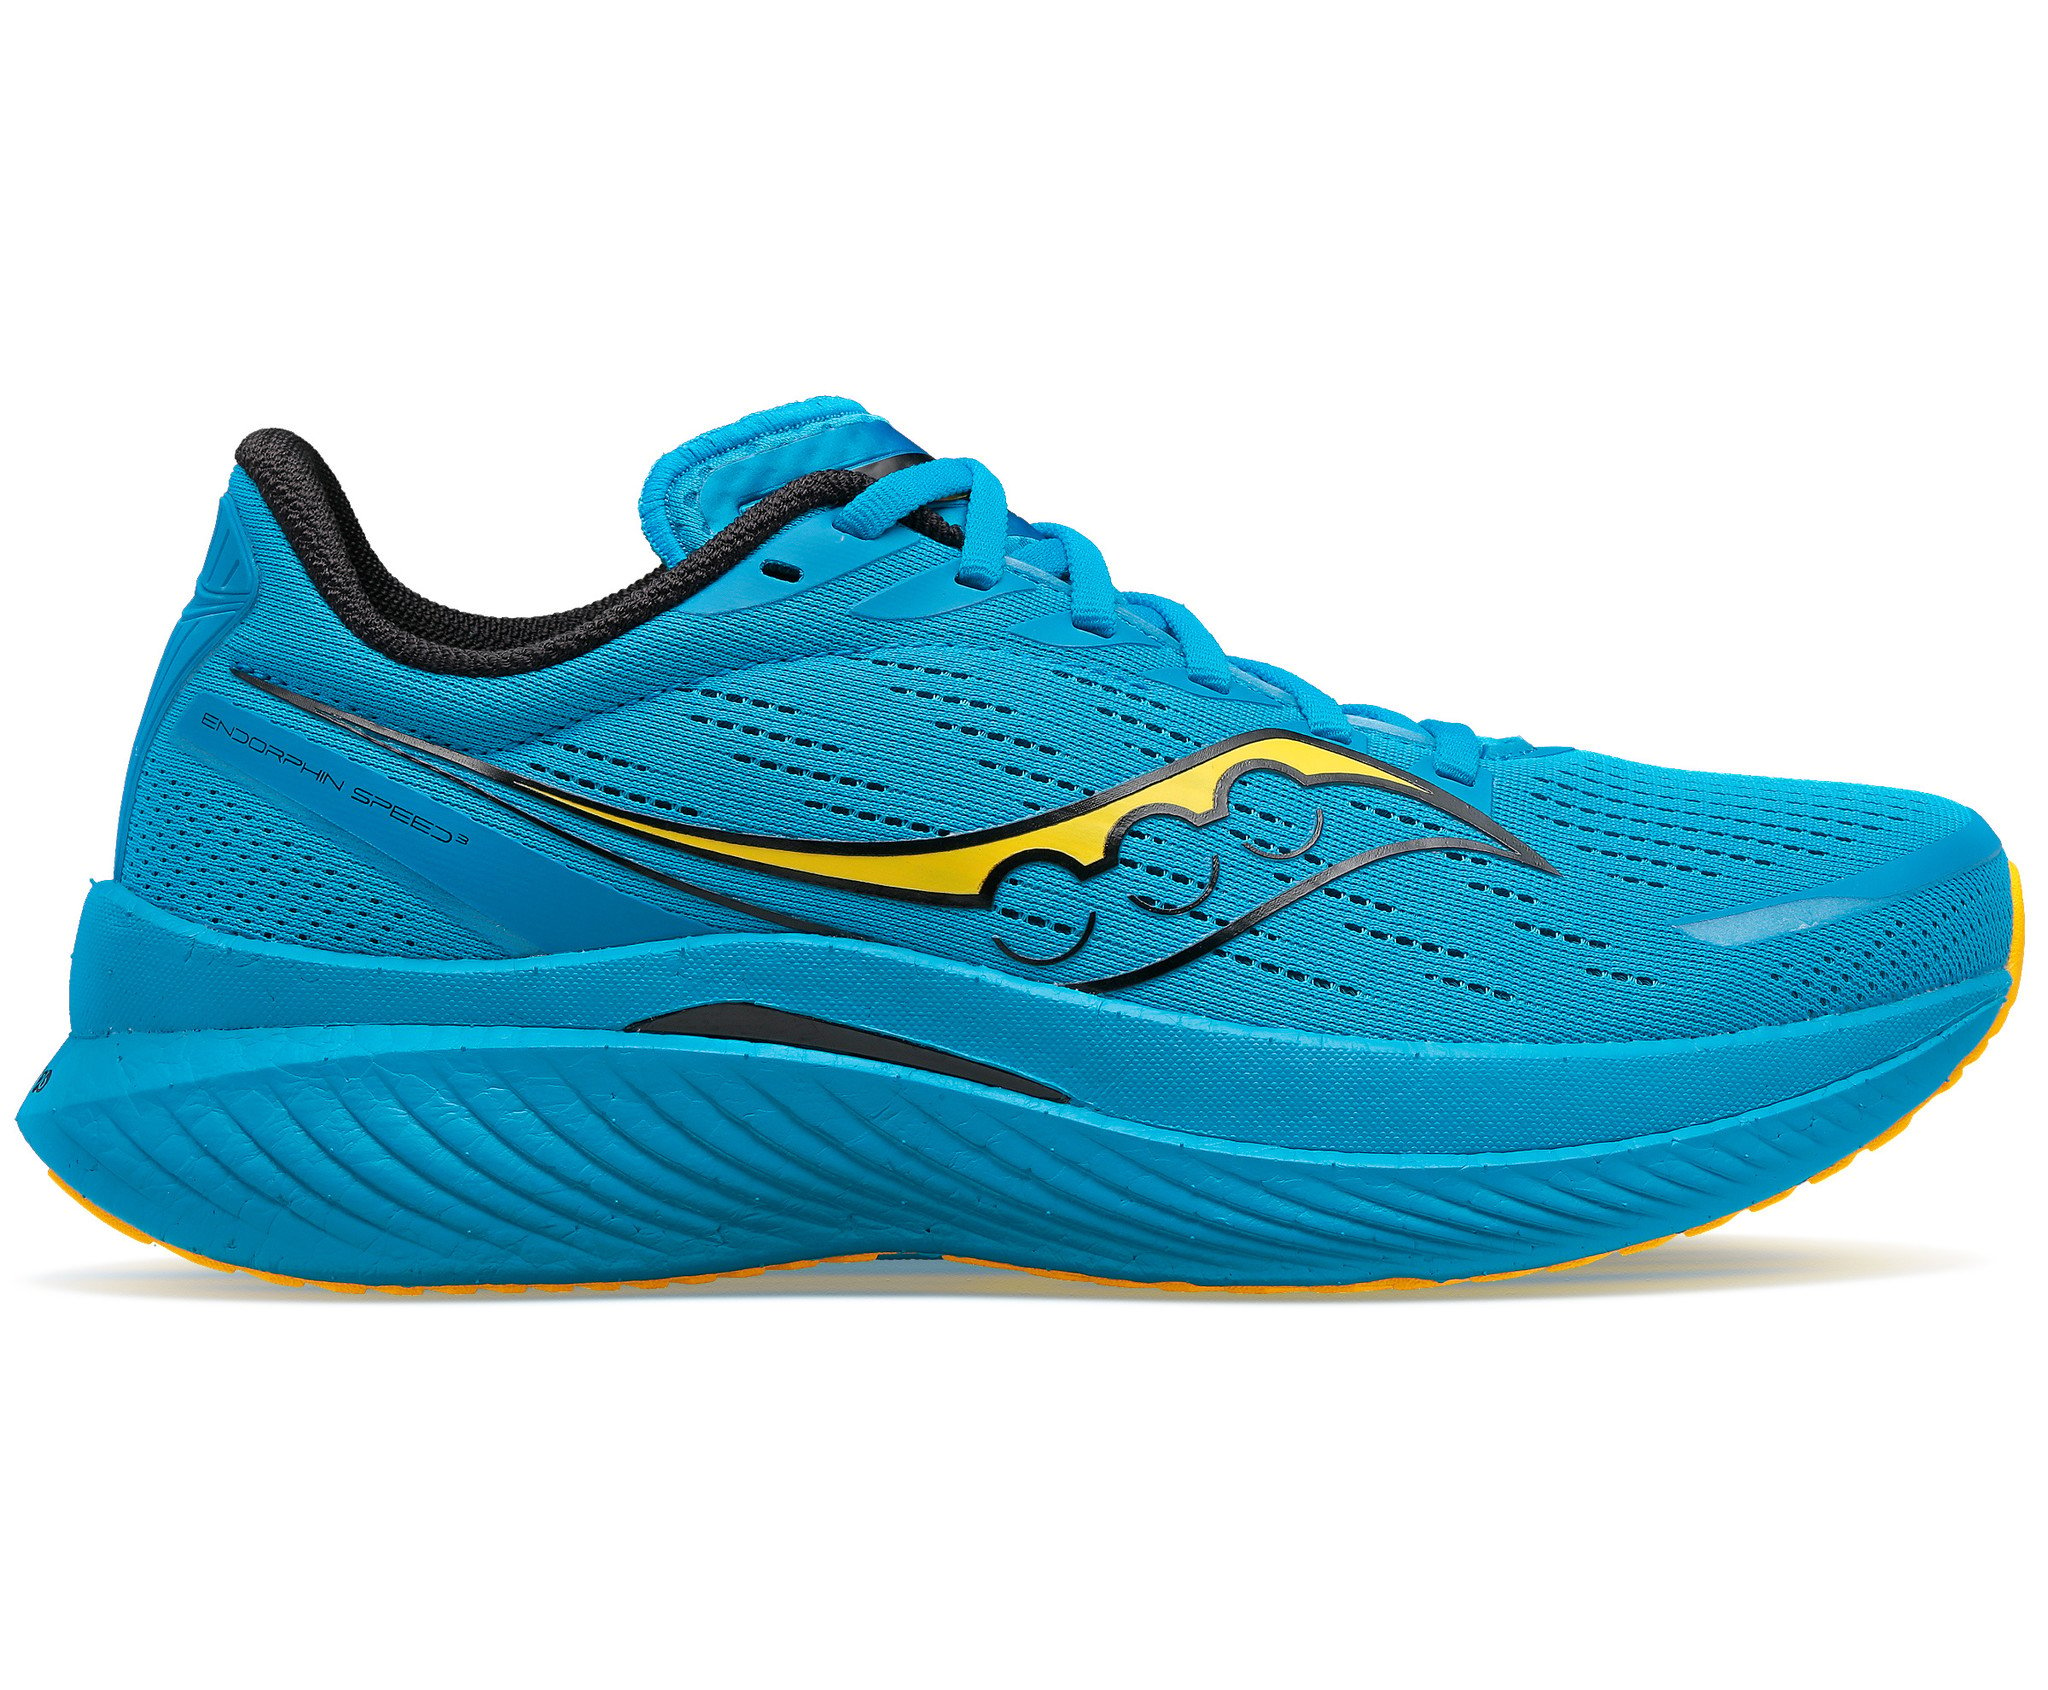 Saucony Endorphin Speed review: An impressive running shoe - Reviewed